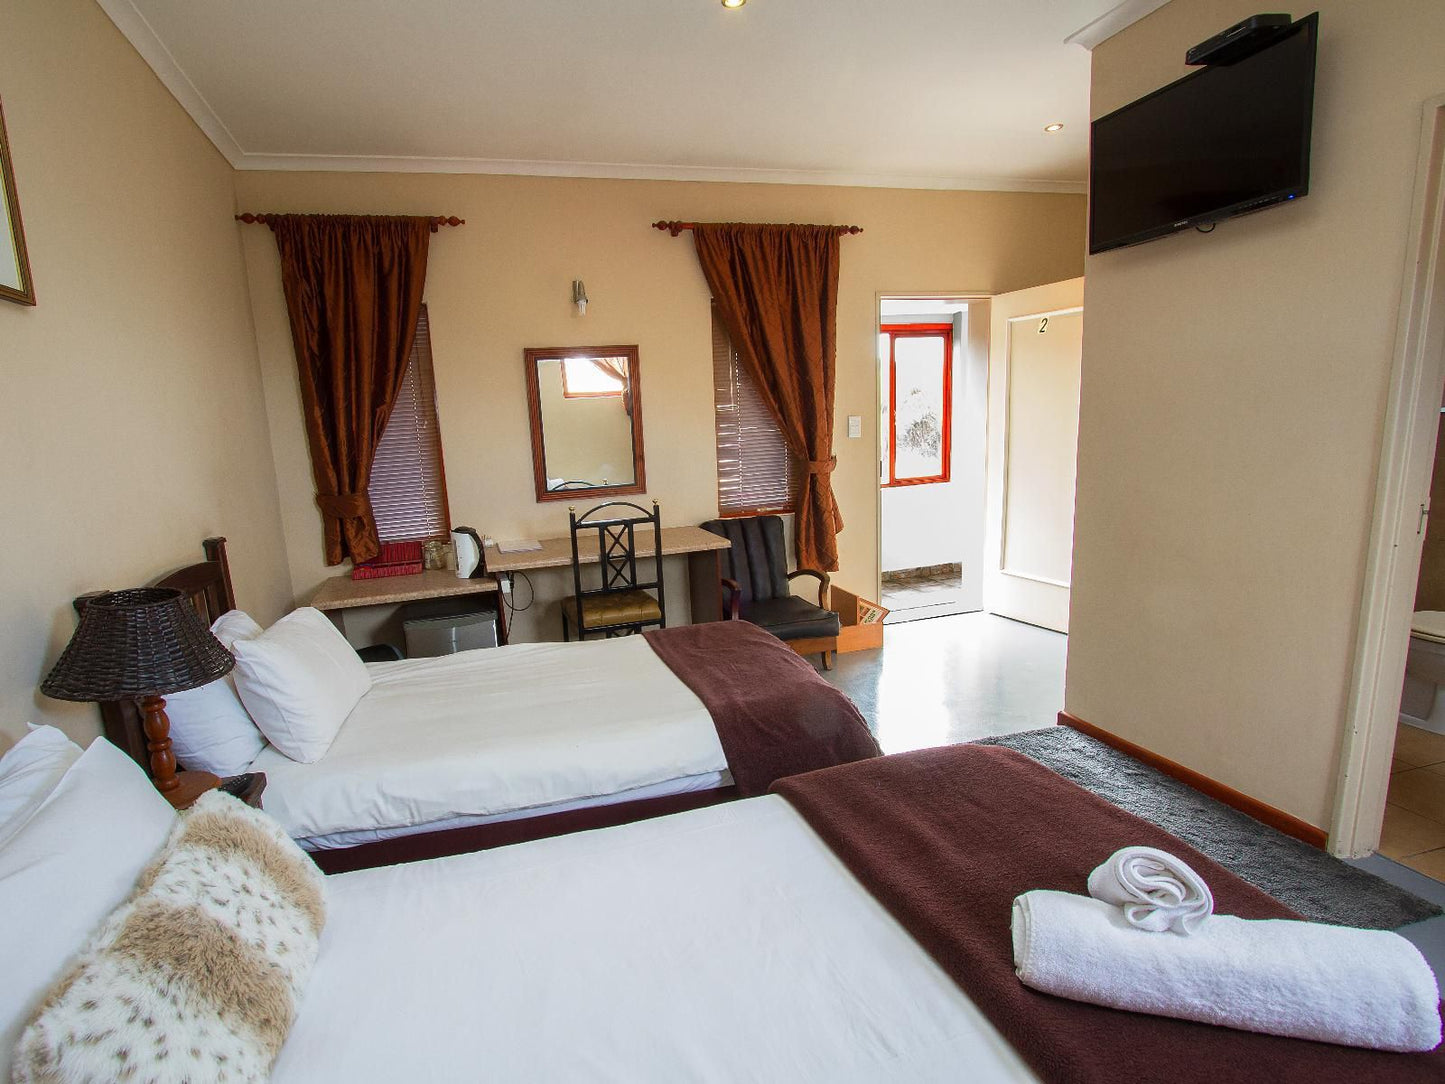 Ramasibi Bed And Breakfast Parow Cape Town Western Cape South Africa Bedroom